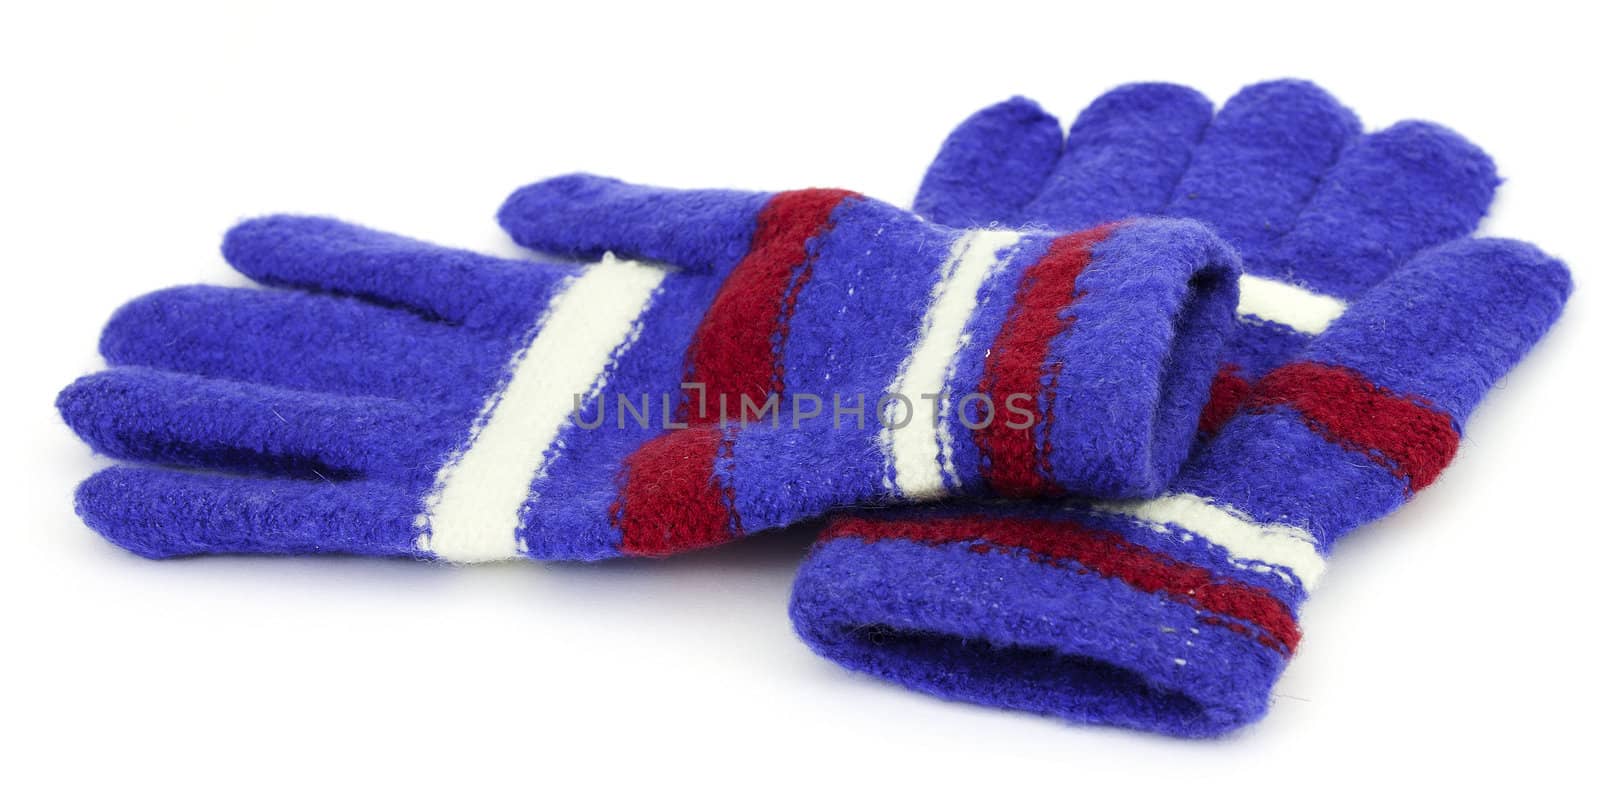 Colored knitted gloves with a white background